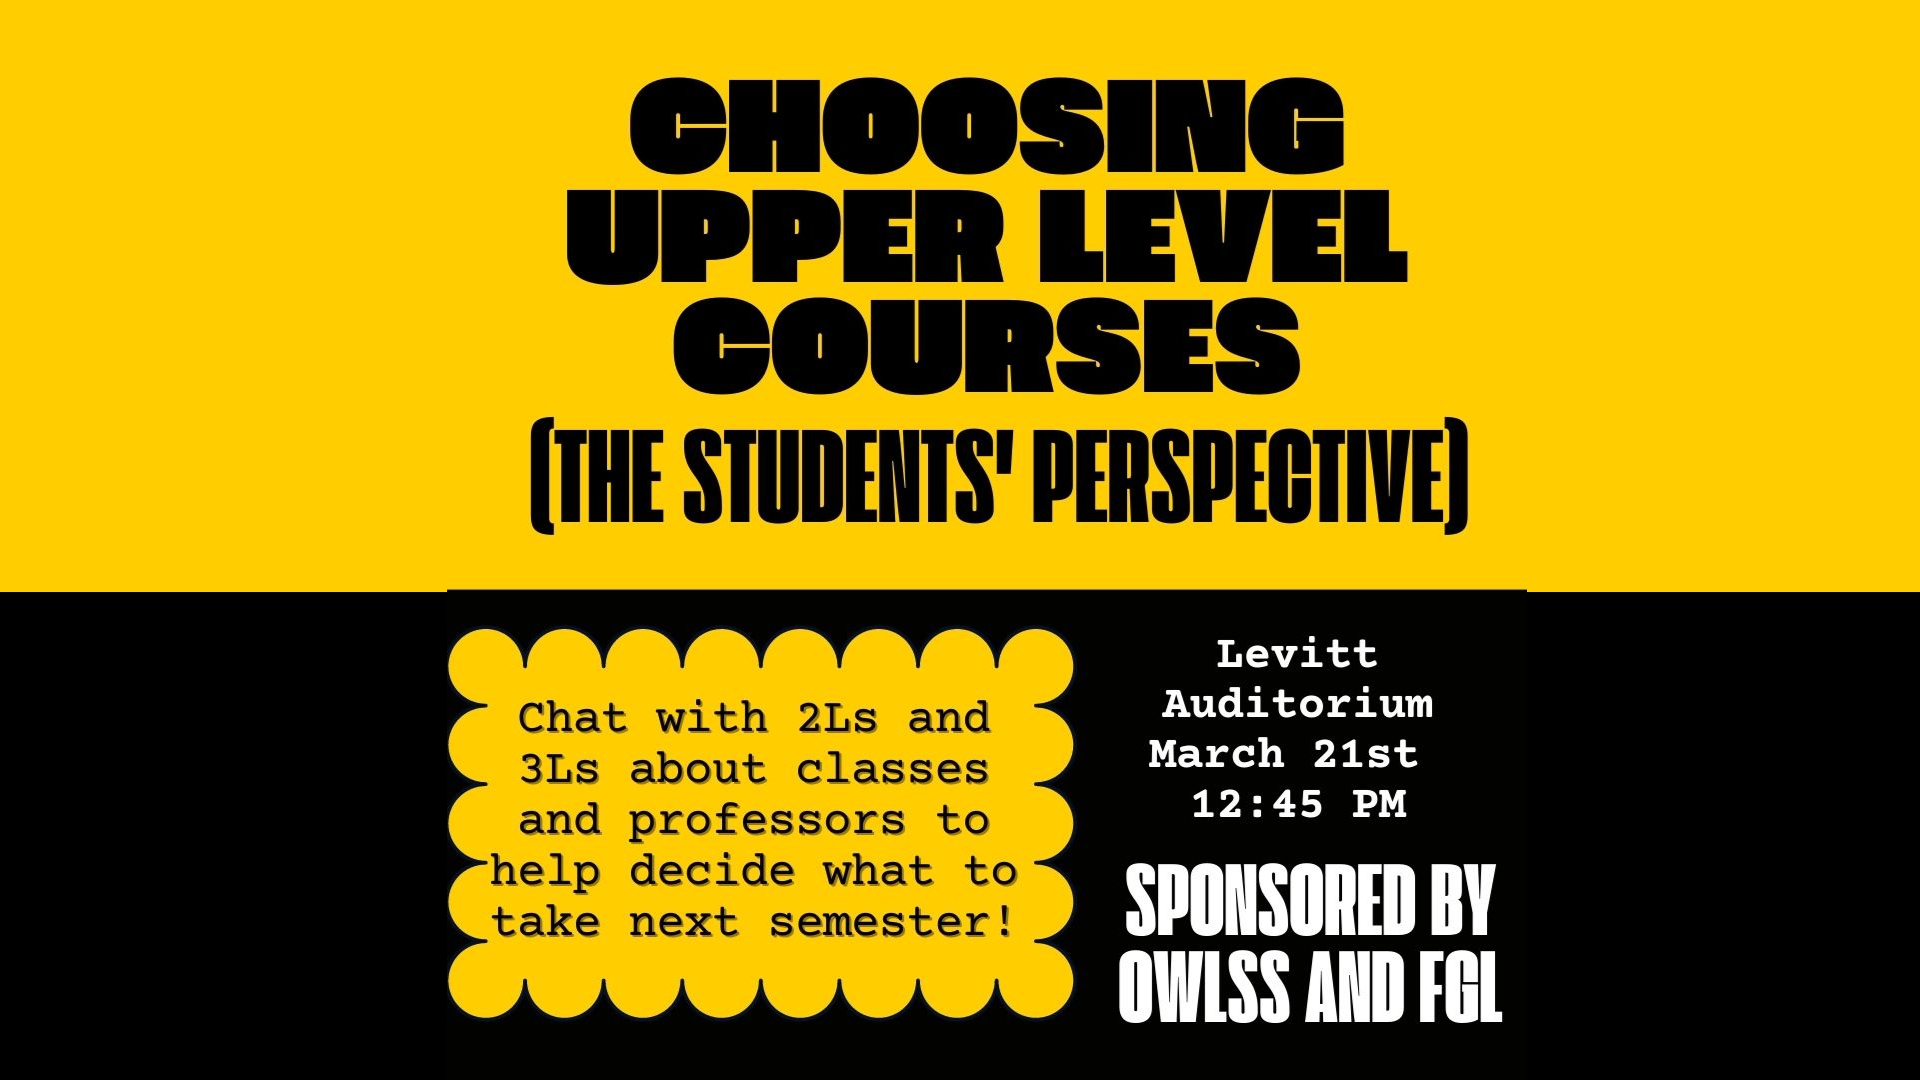   Choosing Upper Level Courses [the students' perspective]    Chat with 2Ls and 3Ls about classes and professors to help decide what to take next semester!    Levitt Auditorium March 21st 12:45 PM    Sponsored by OWLSS and FGL